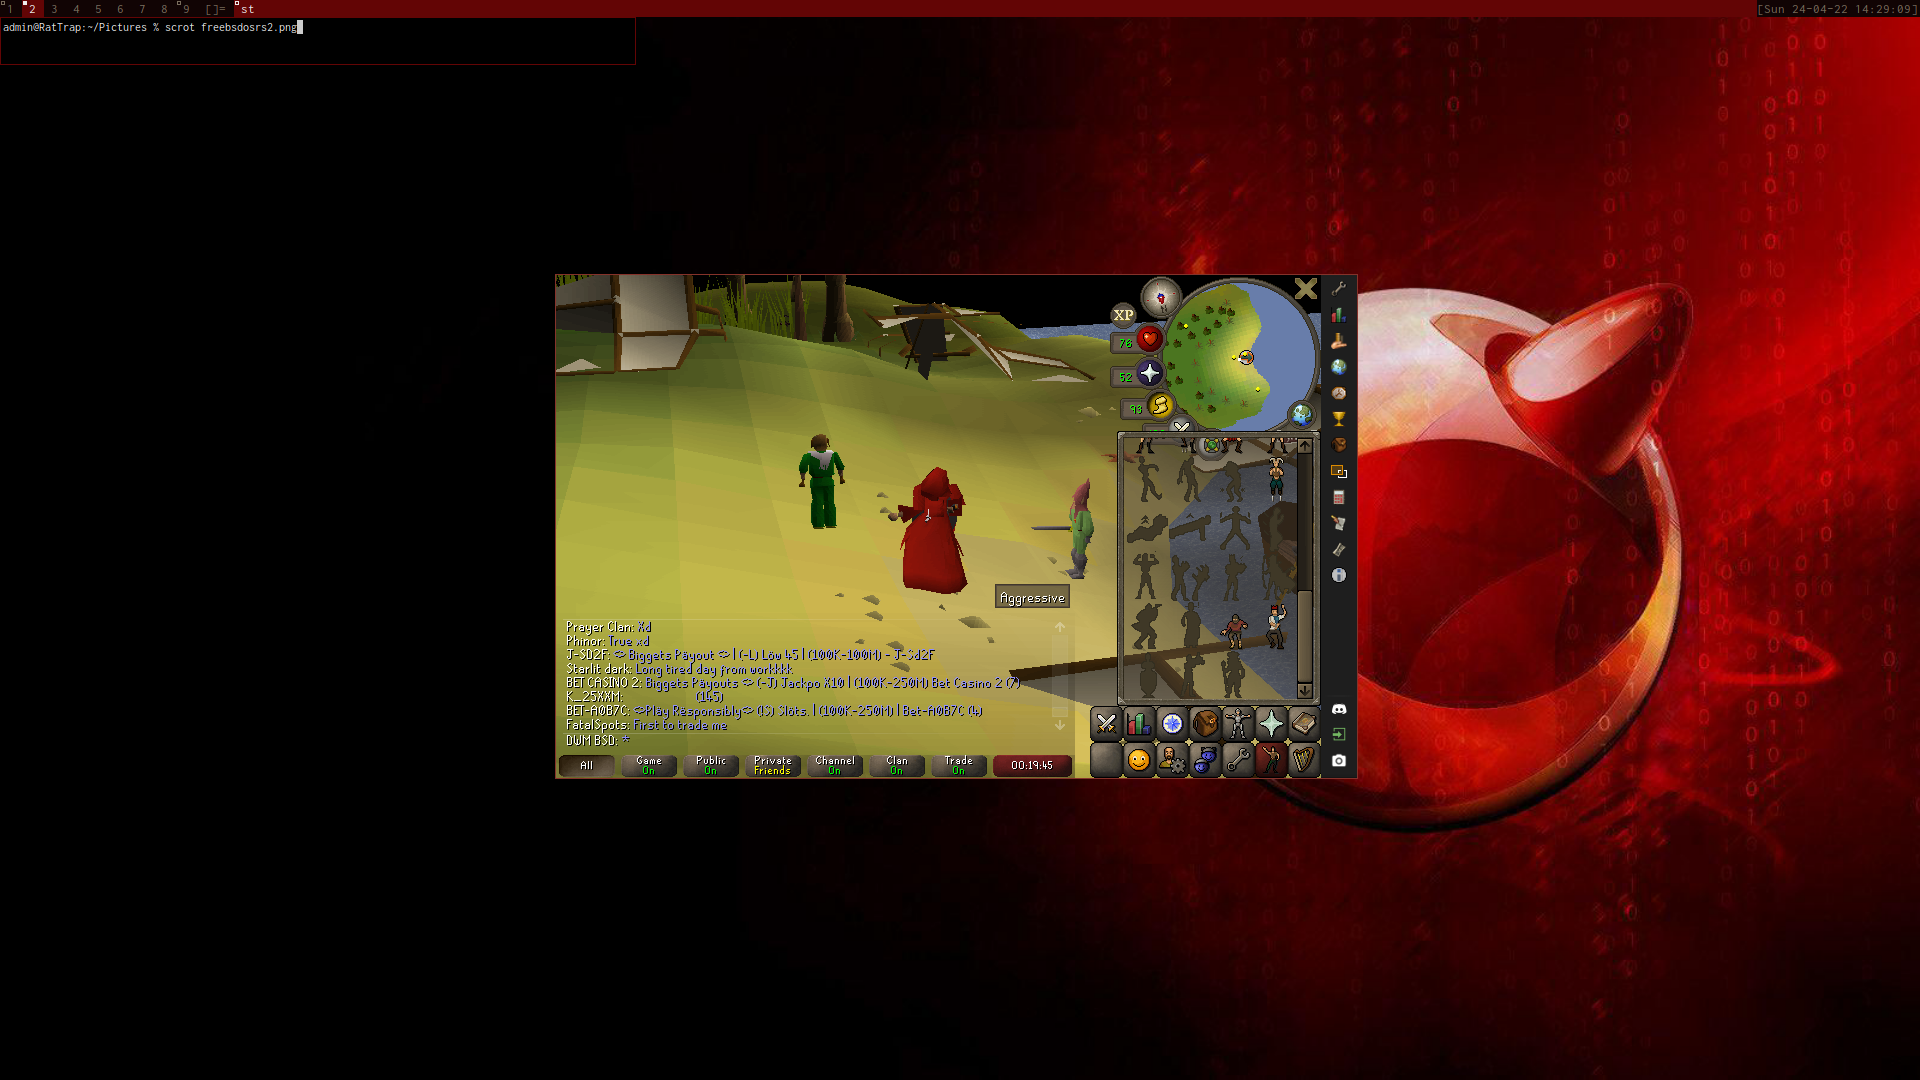 OSRS on FreeBSD 13